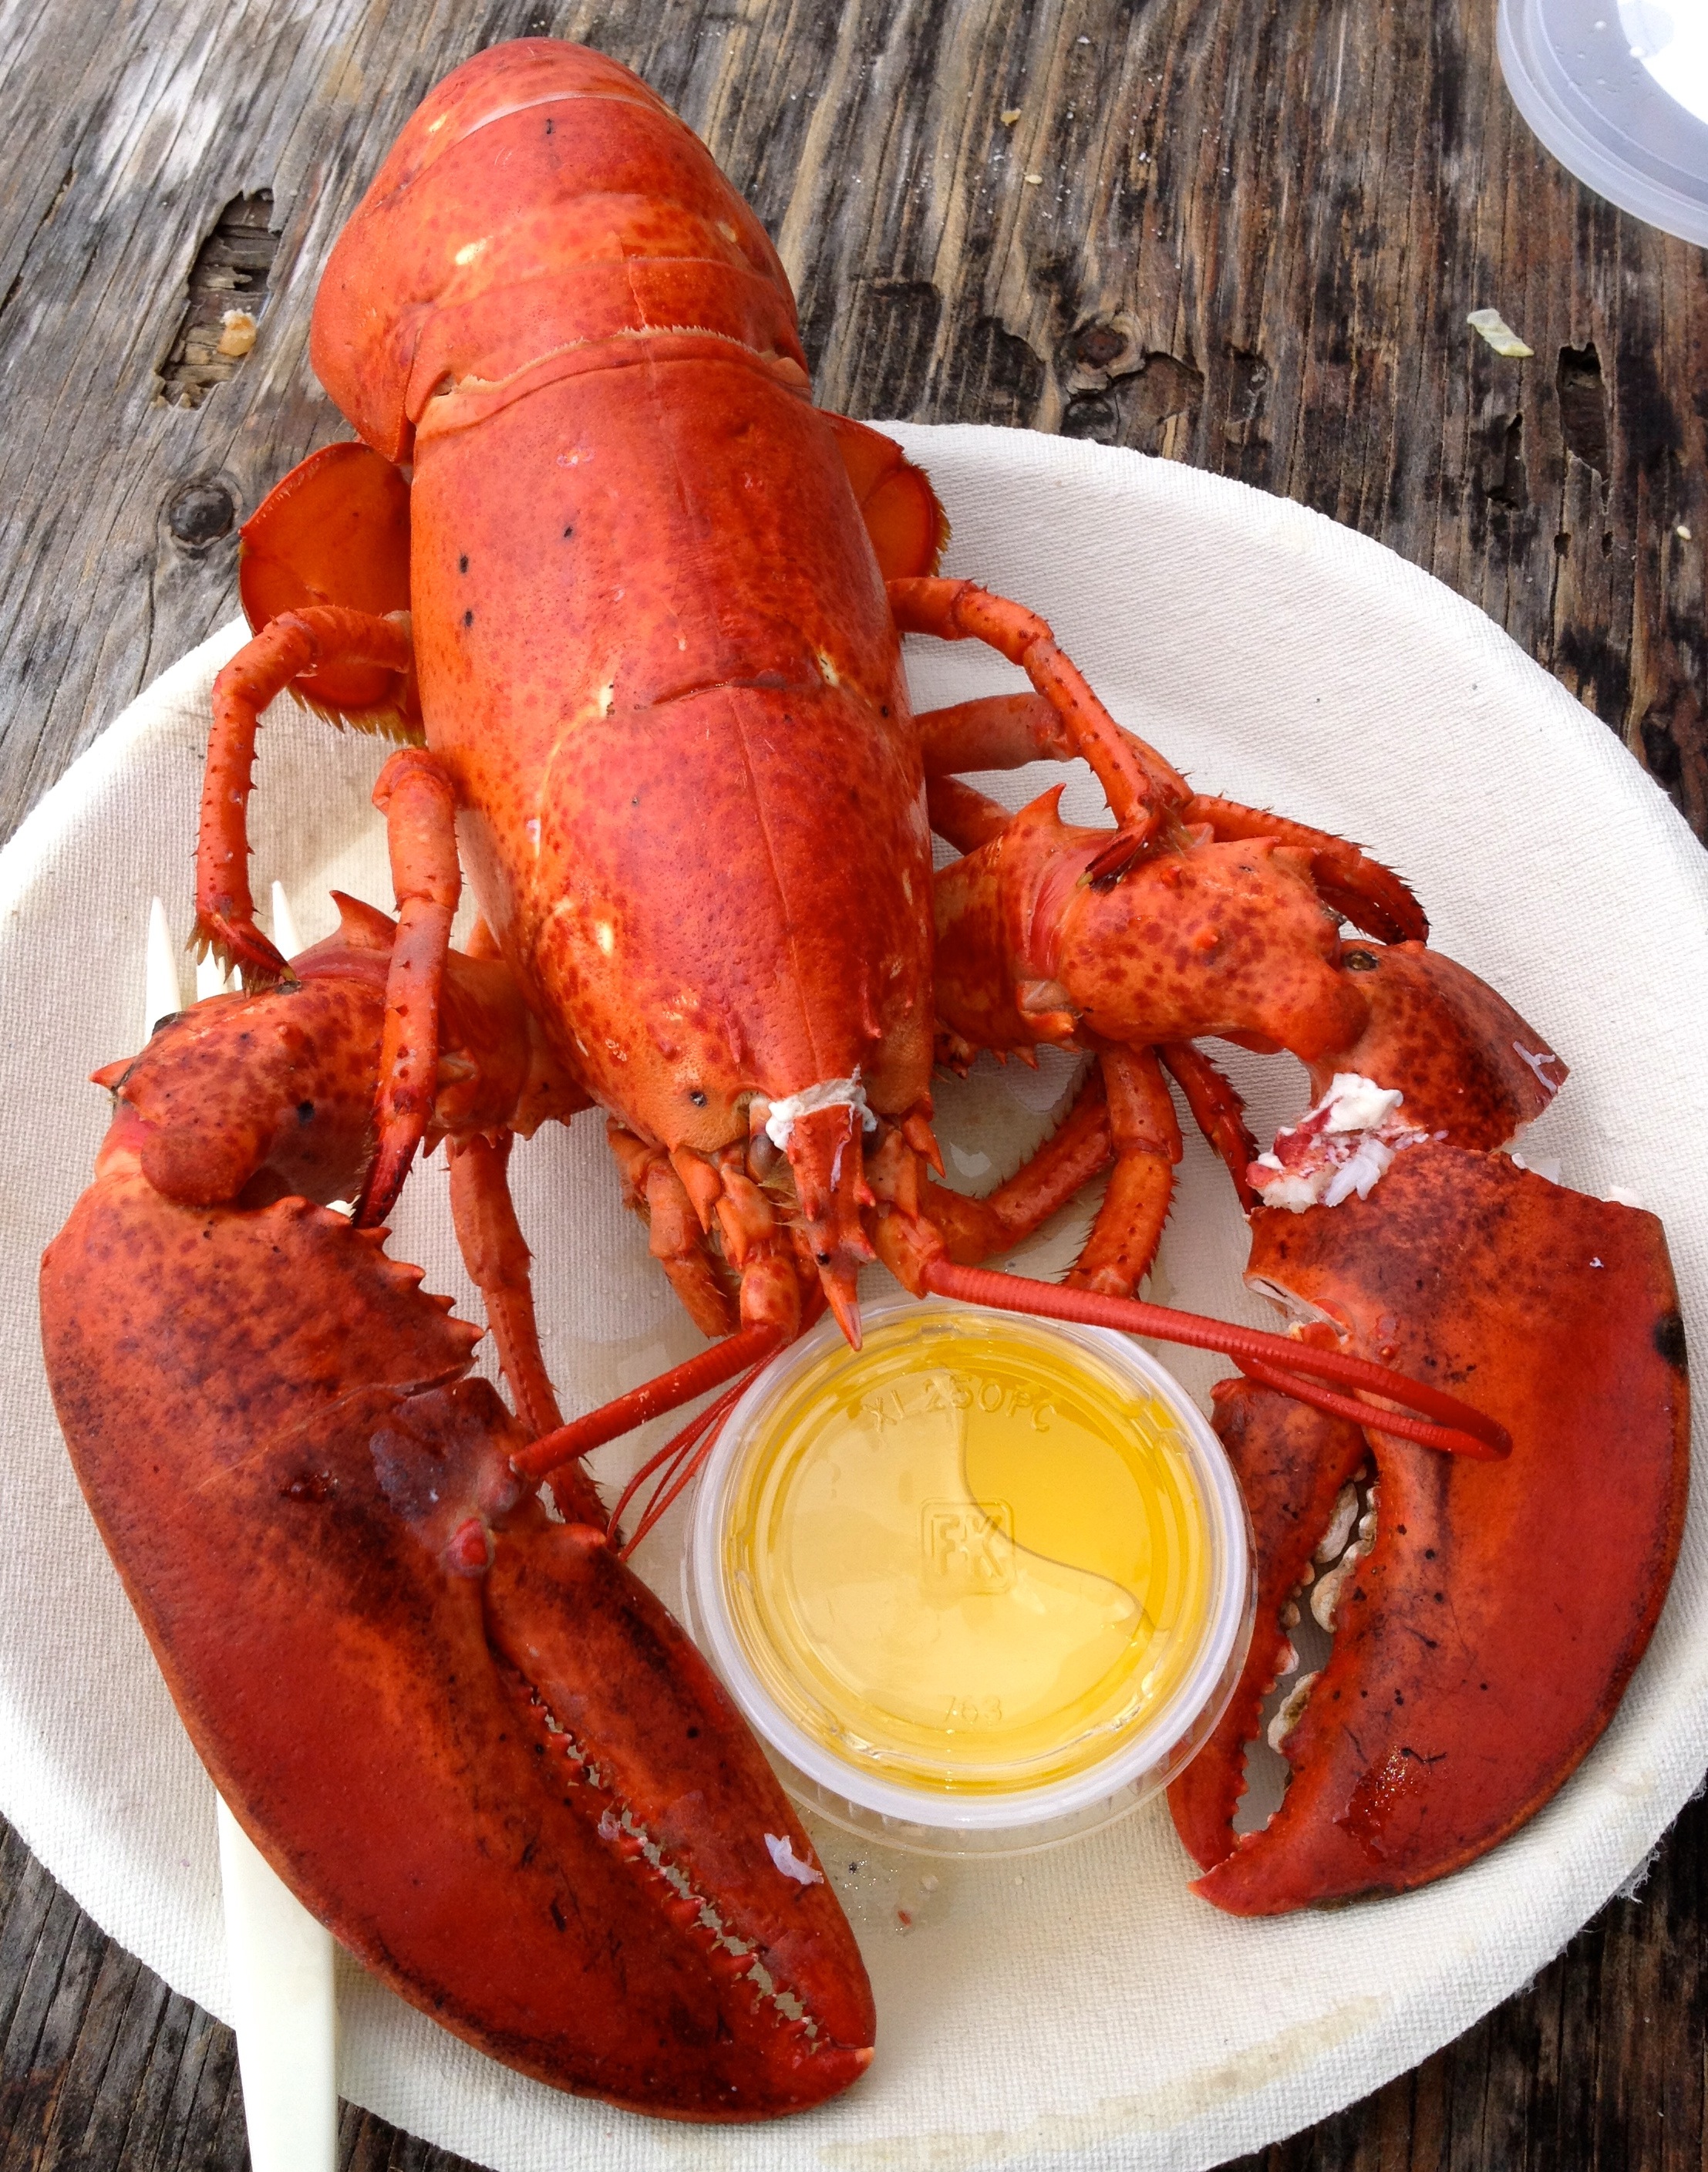 May you always have lobster!